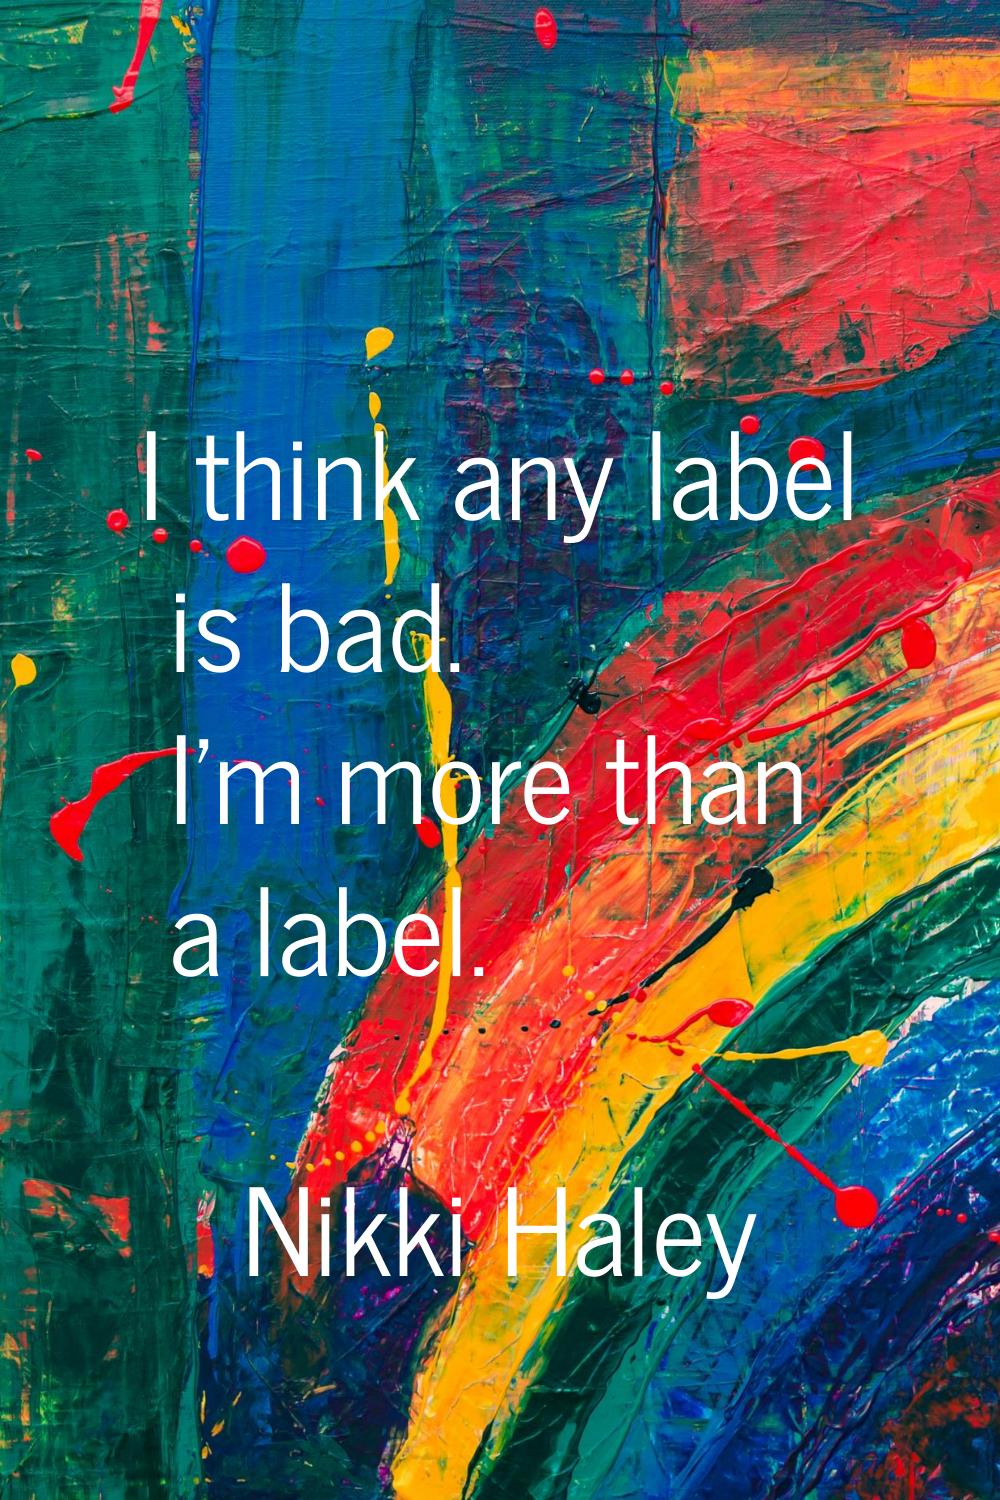 I think any label is bad. I'm more than a label.